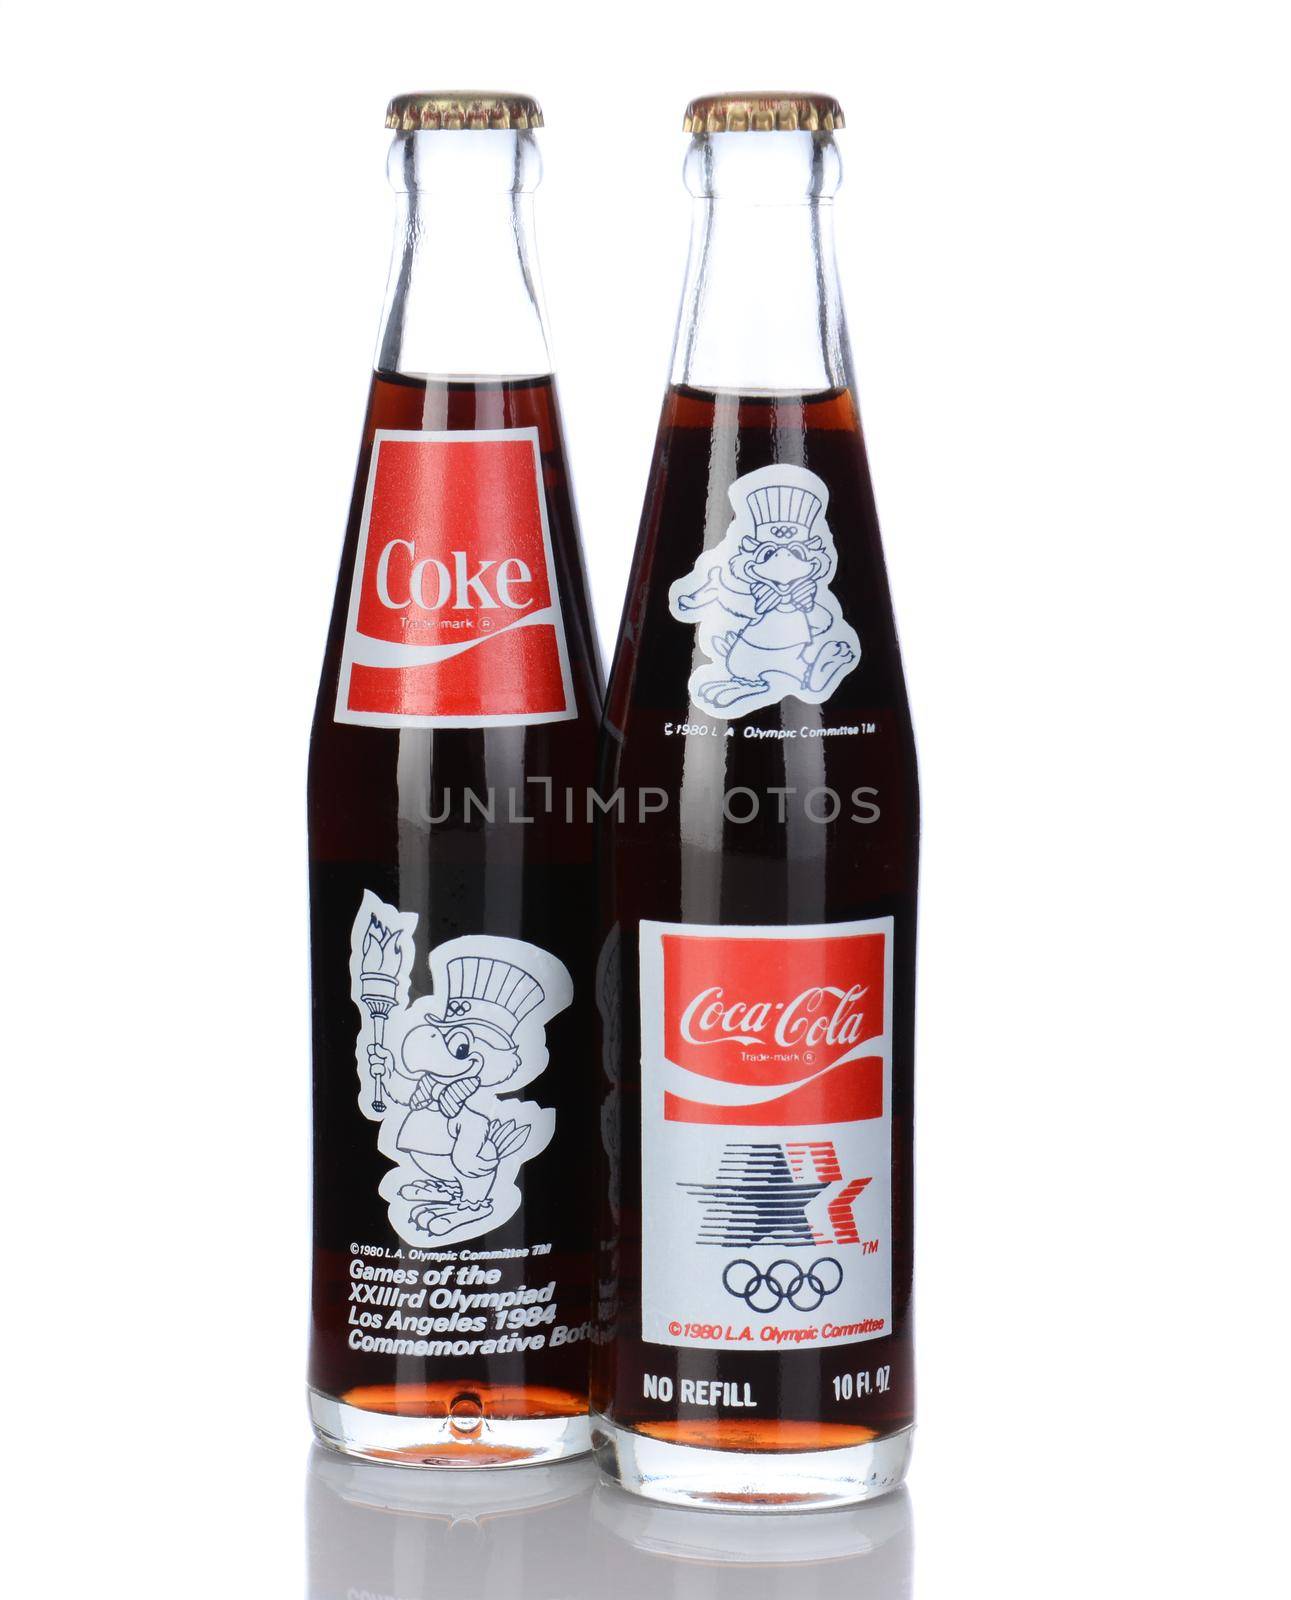 IRVINE, CA - January 05, 2014: 2 Commemorative Bottles of Coca Cola from the 1984 Los Angeles Olympic Games. The front and back of the bottles are shown with the mascot and logo.